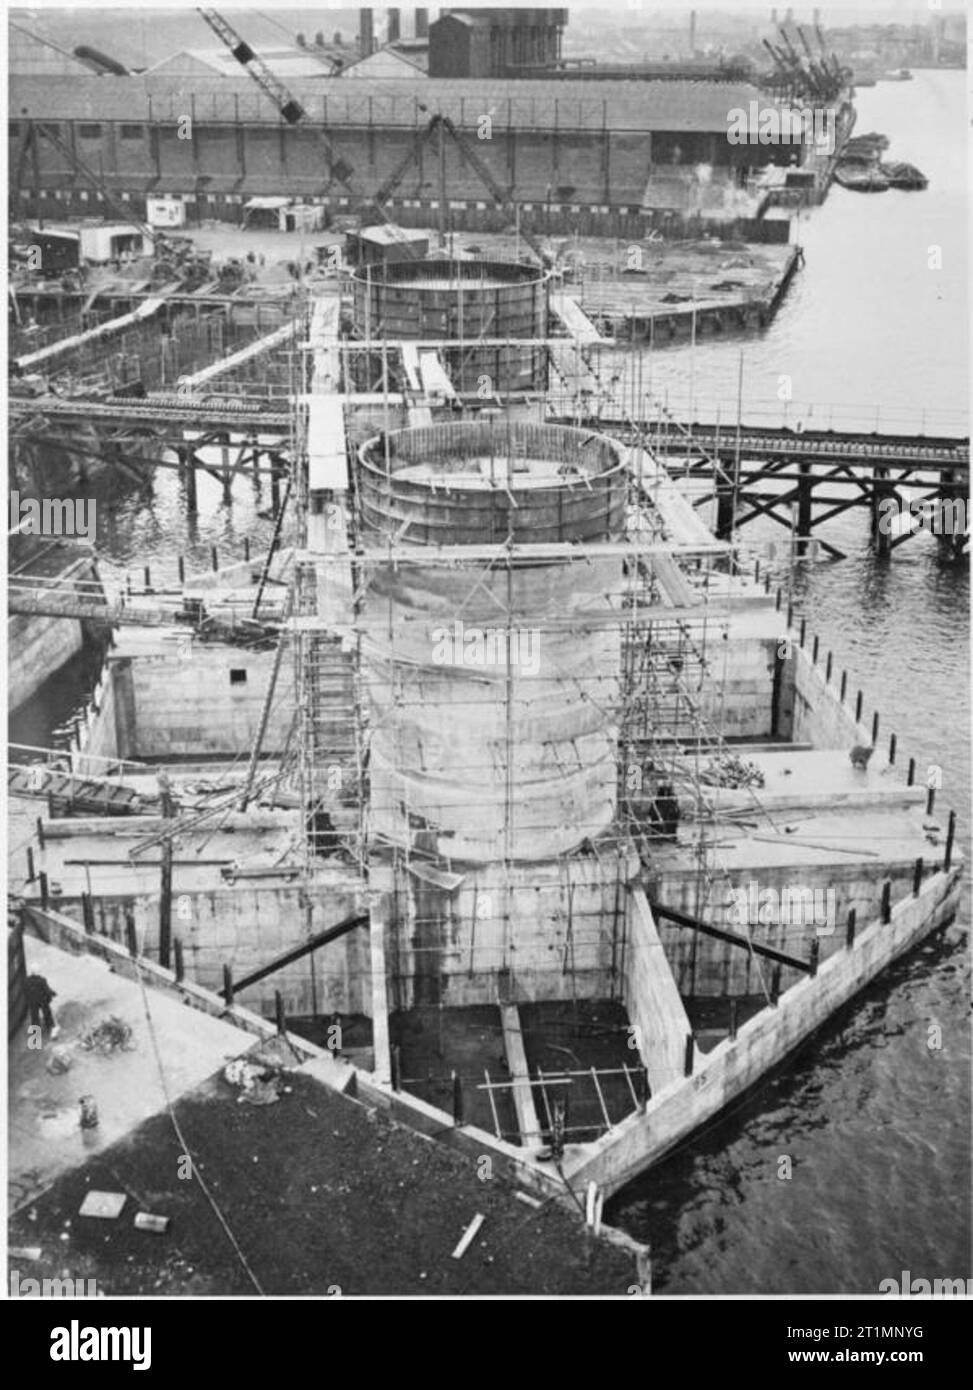 The Royal Navy during the Second World War Maunsell Sea forts in the Thames Estuary: In the dock basin the twin towers of a sea fort to be used in the Thames Estuary are rapidly rising from the floating pontoon. A pre-assembled spot welded cage is hoisted into position, and the concrete is poured between a permanent wooden inner wall and an outer steel shell. Then the steel shell is moved up and the next cast is made. These secret forts were an effective defence against attacks by sea and air on the estuary. Stock Photo